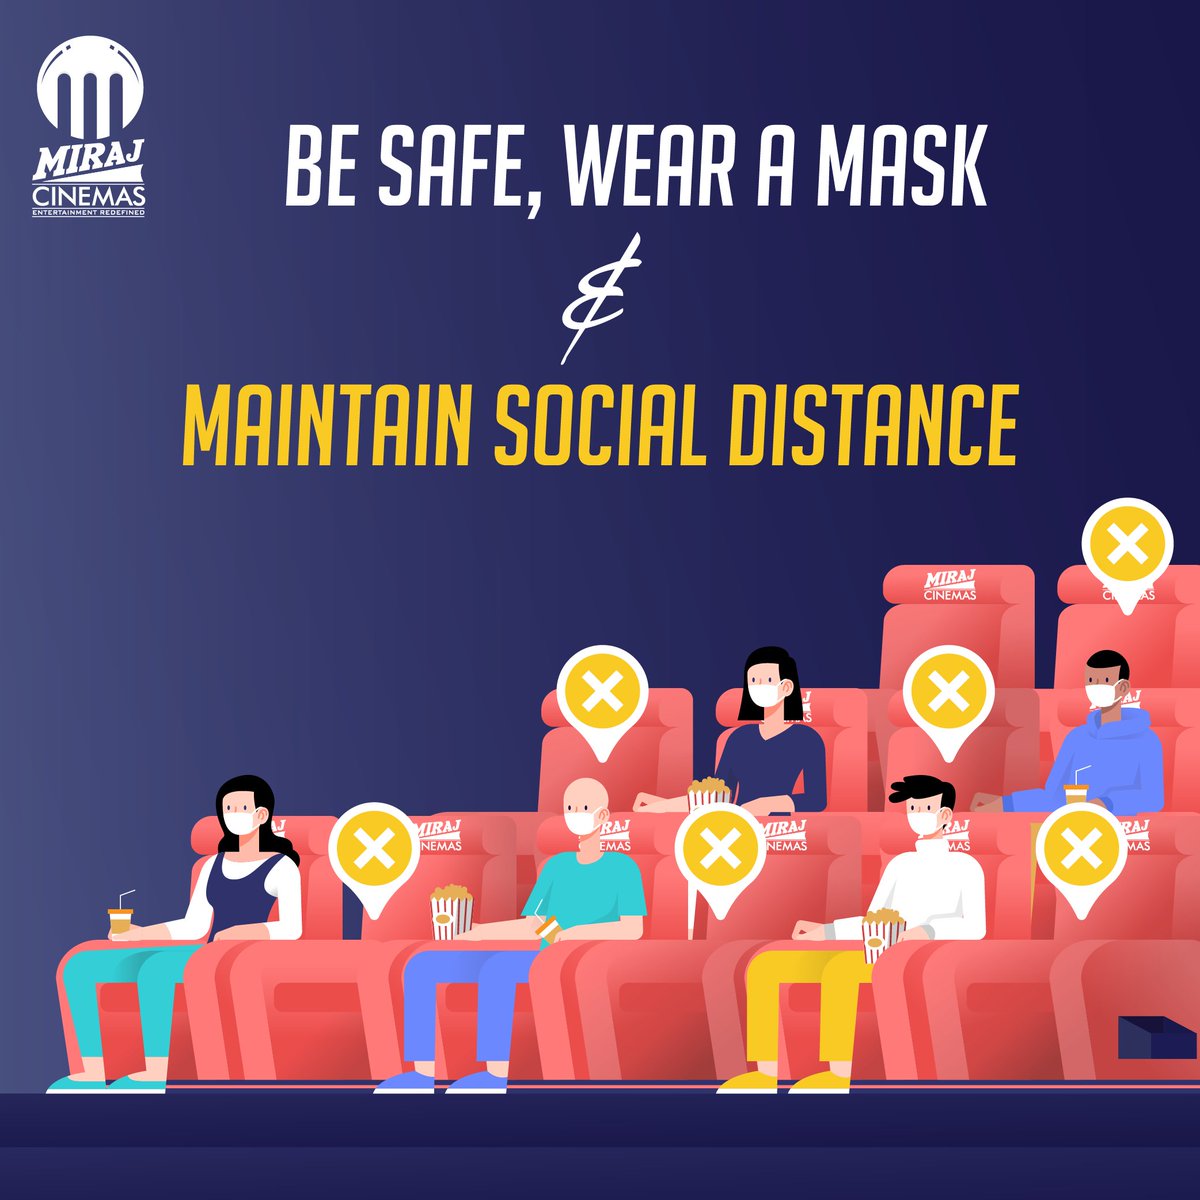 Social distancing is mandatory but we won't distance you from Entertainment and fun. 
We promise!
.
.
.
#MirajCinemas #socialdistancing
#6feet #MaximumEntertainment
#HygieneRedefined #entertainment